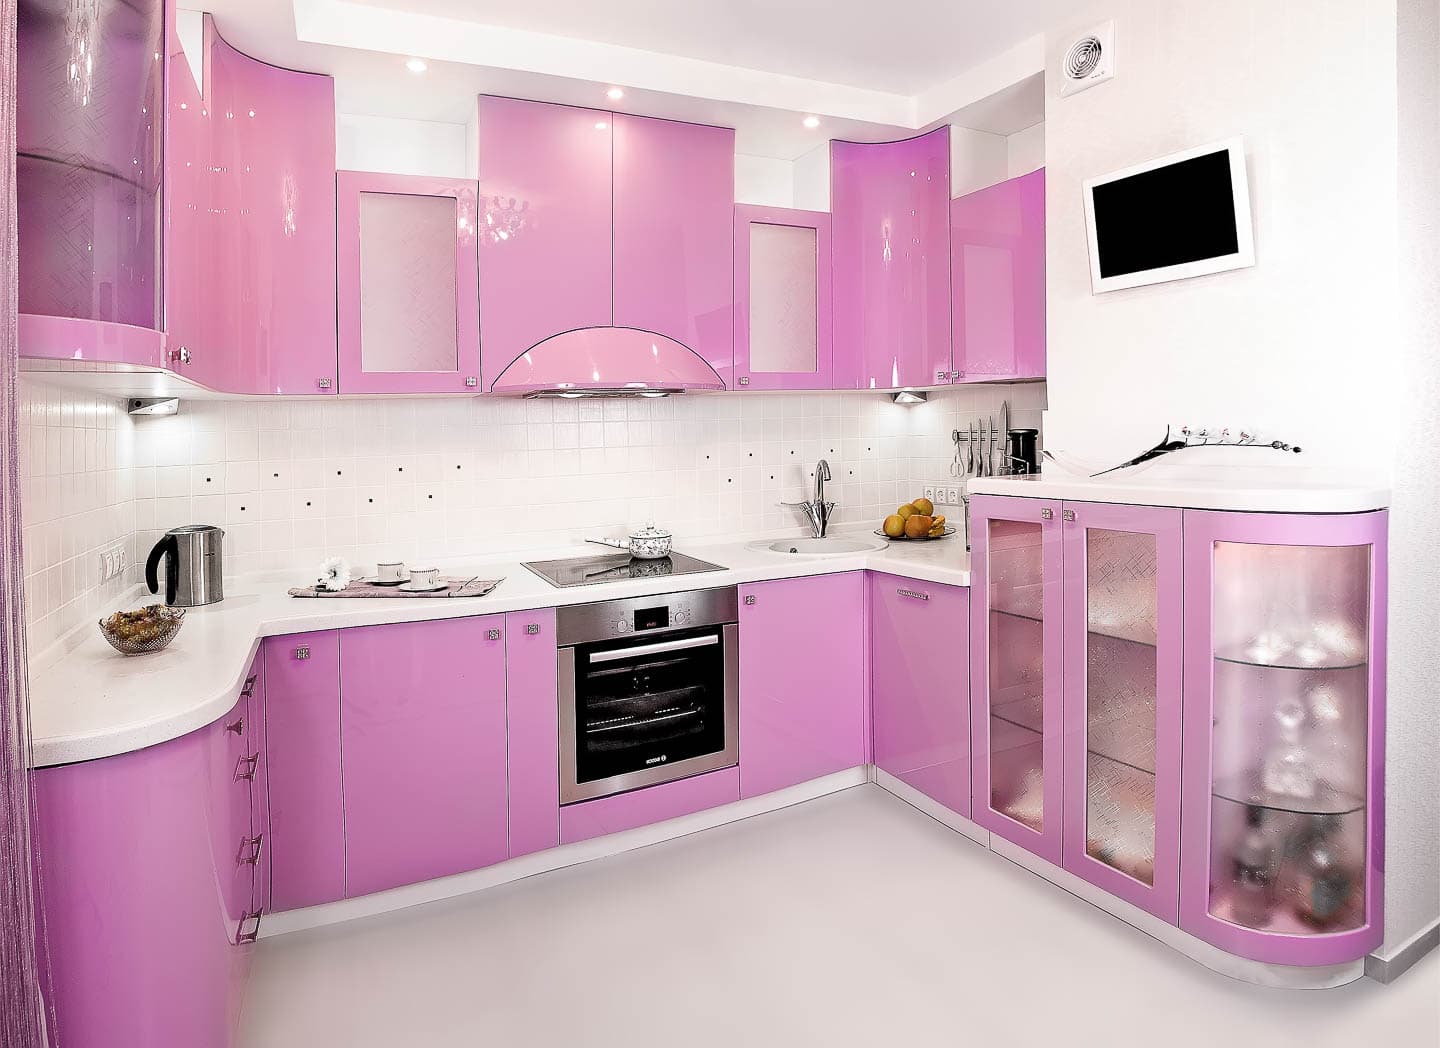 Retro-style kitchen with high gloss pink cabinets, which countertops and backsplash with rounded corners